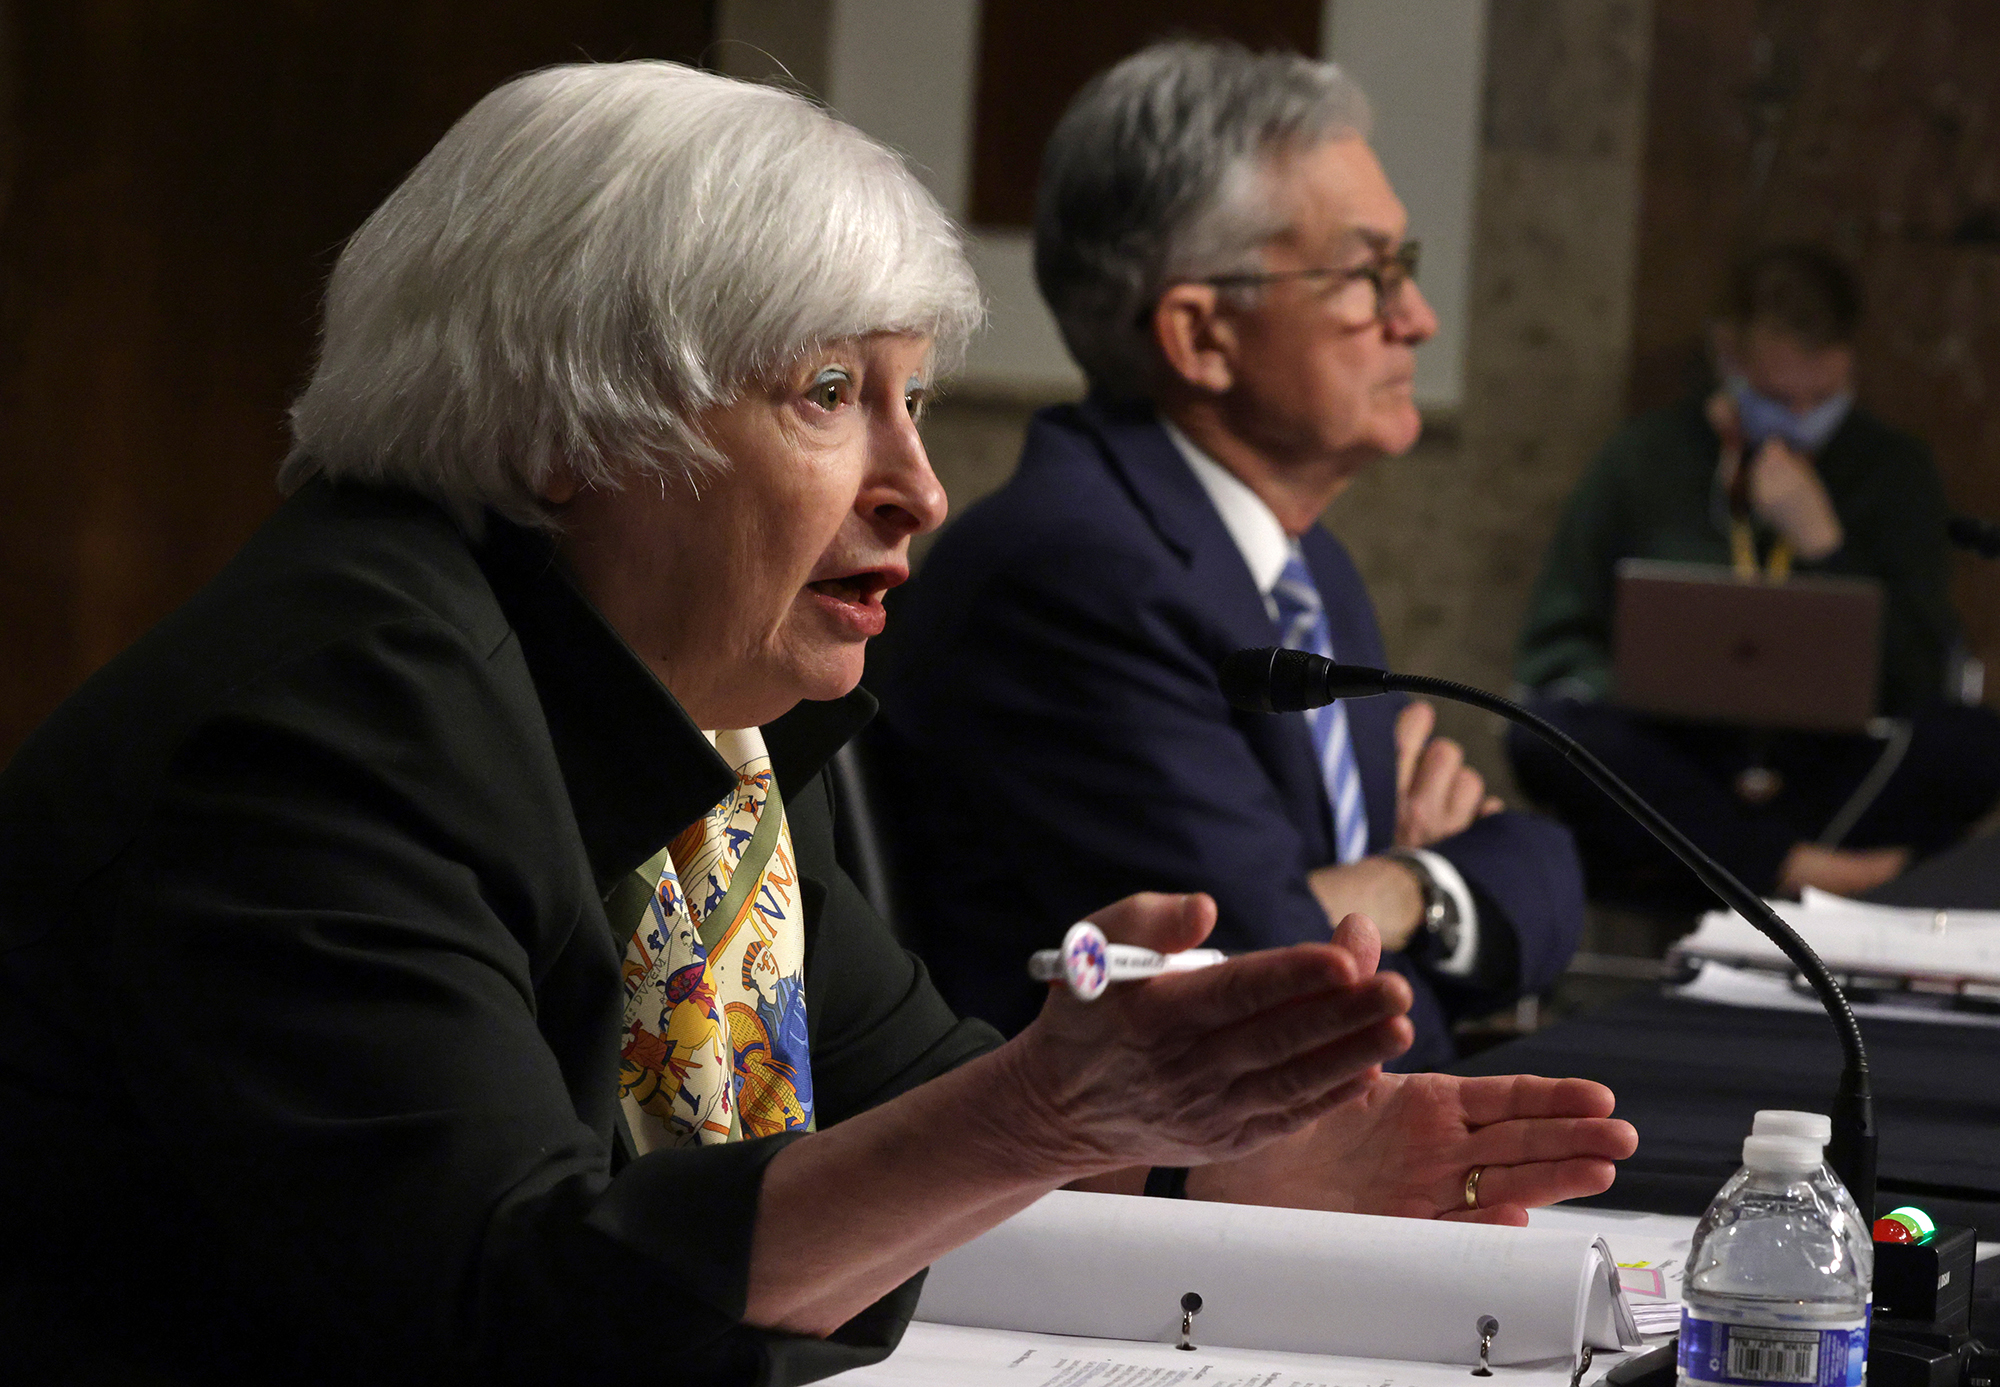 U.S. Treasury Secretary Janet Yellen (L) and Federal Reserve Board Chairman Jerome Powell (R) testified during a hearing before Senate Banking, Housing and Urban Affairs Committee on Capitol Hill yesterday in Washington, DC.